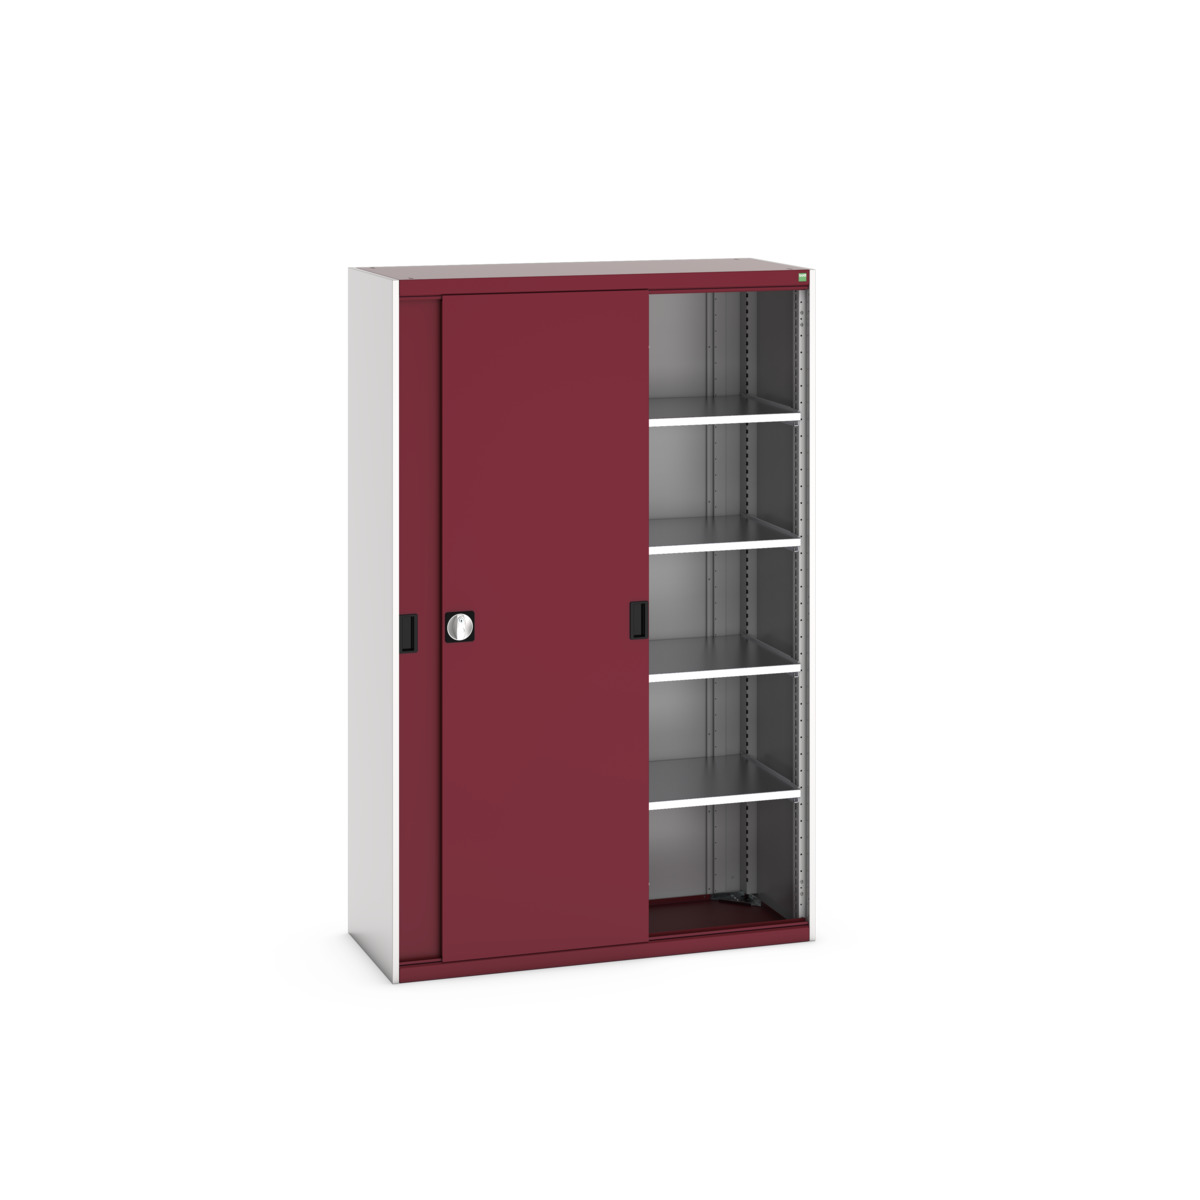 40014063.24V - Armoire Cubio SMS-13520-1.2